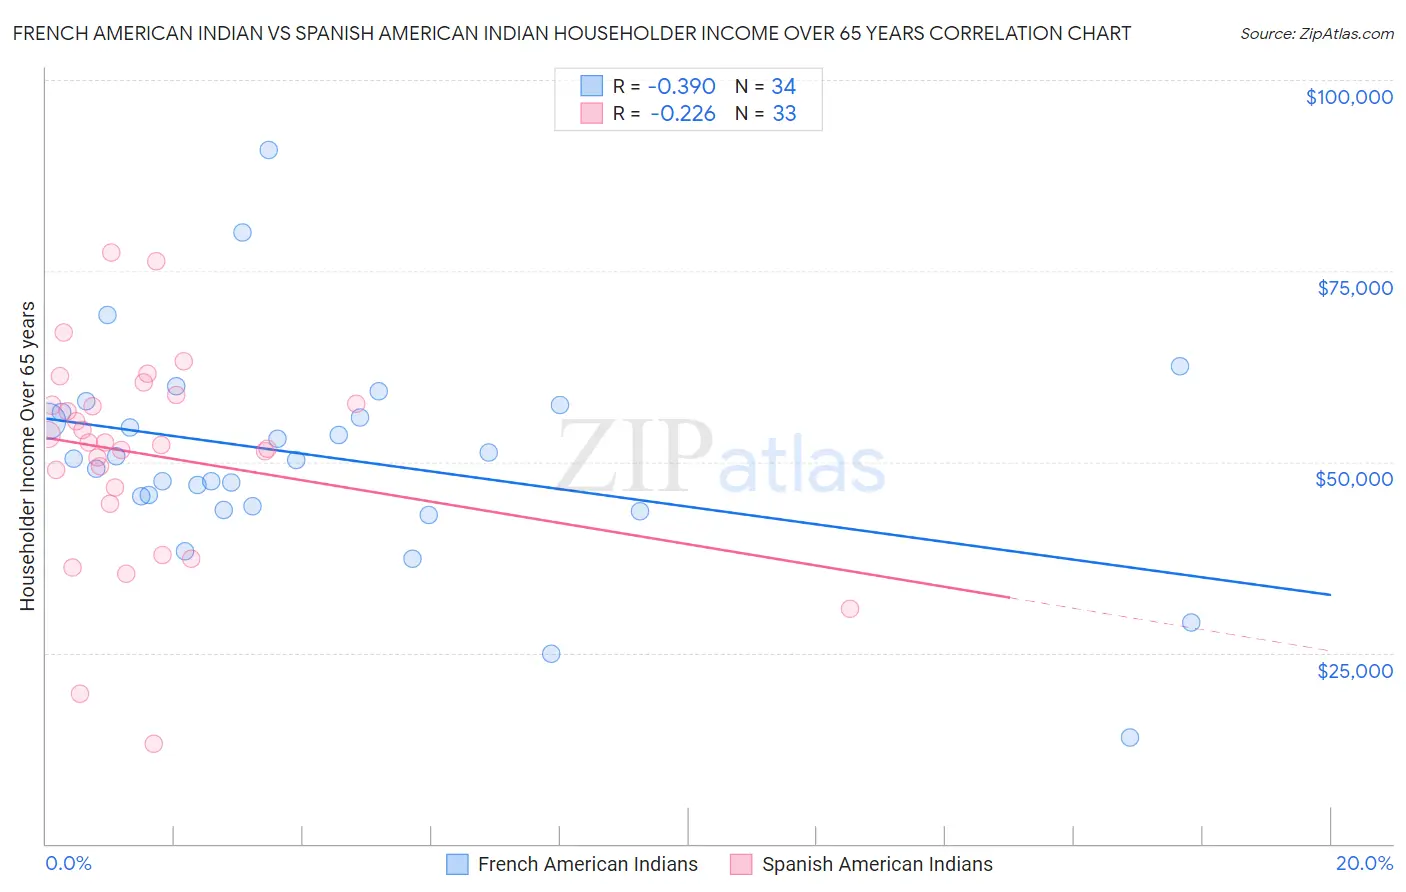 French American Indian vs Spanish American Indian Householder Income Over 65 years